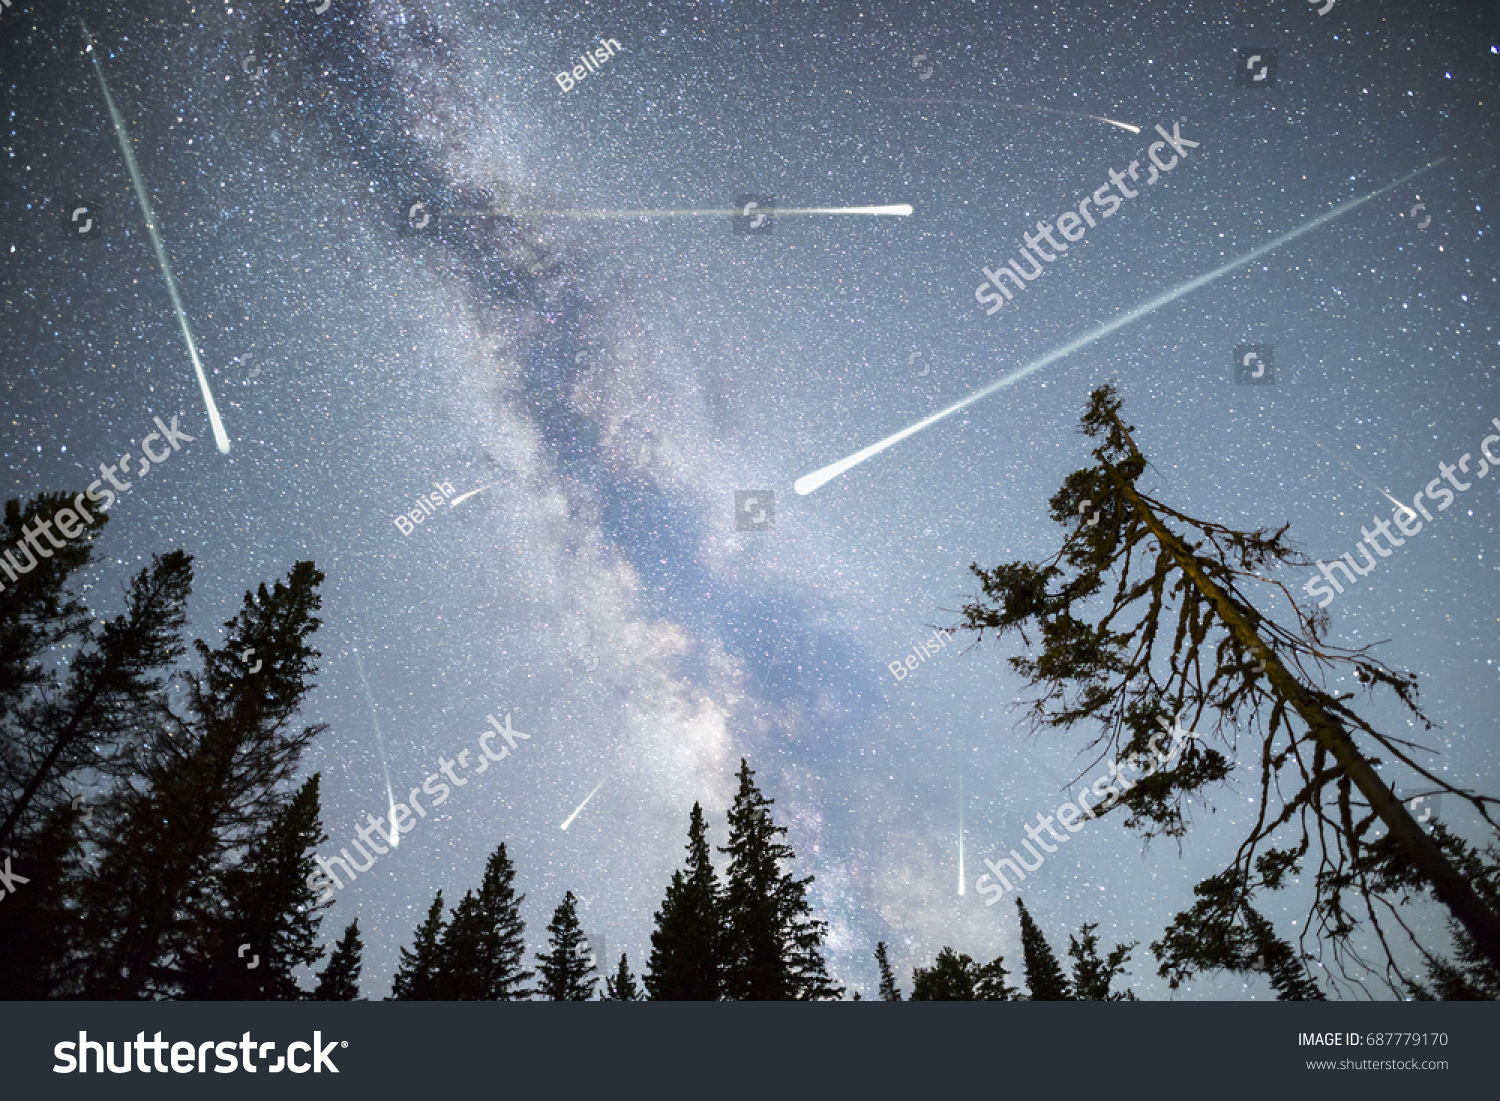 A view of a Meteor Shower and the Milky Way with a pine trees forest silhouette in the foreground. Night sky nature summer landscape. Perseid Meteor Shower observation. #687779170